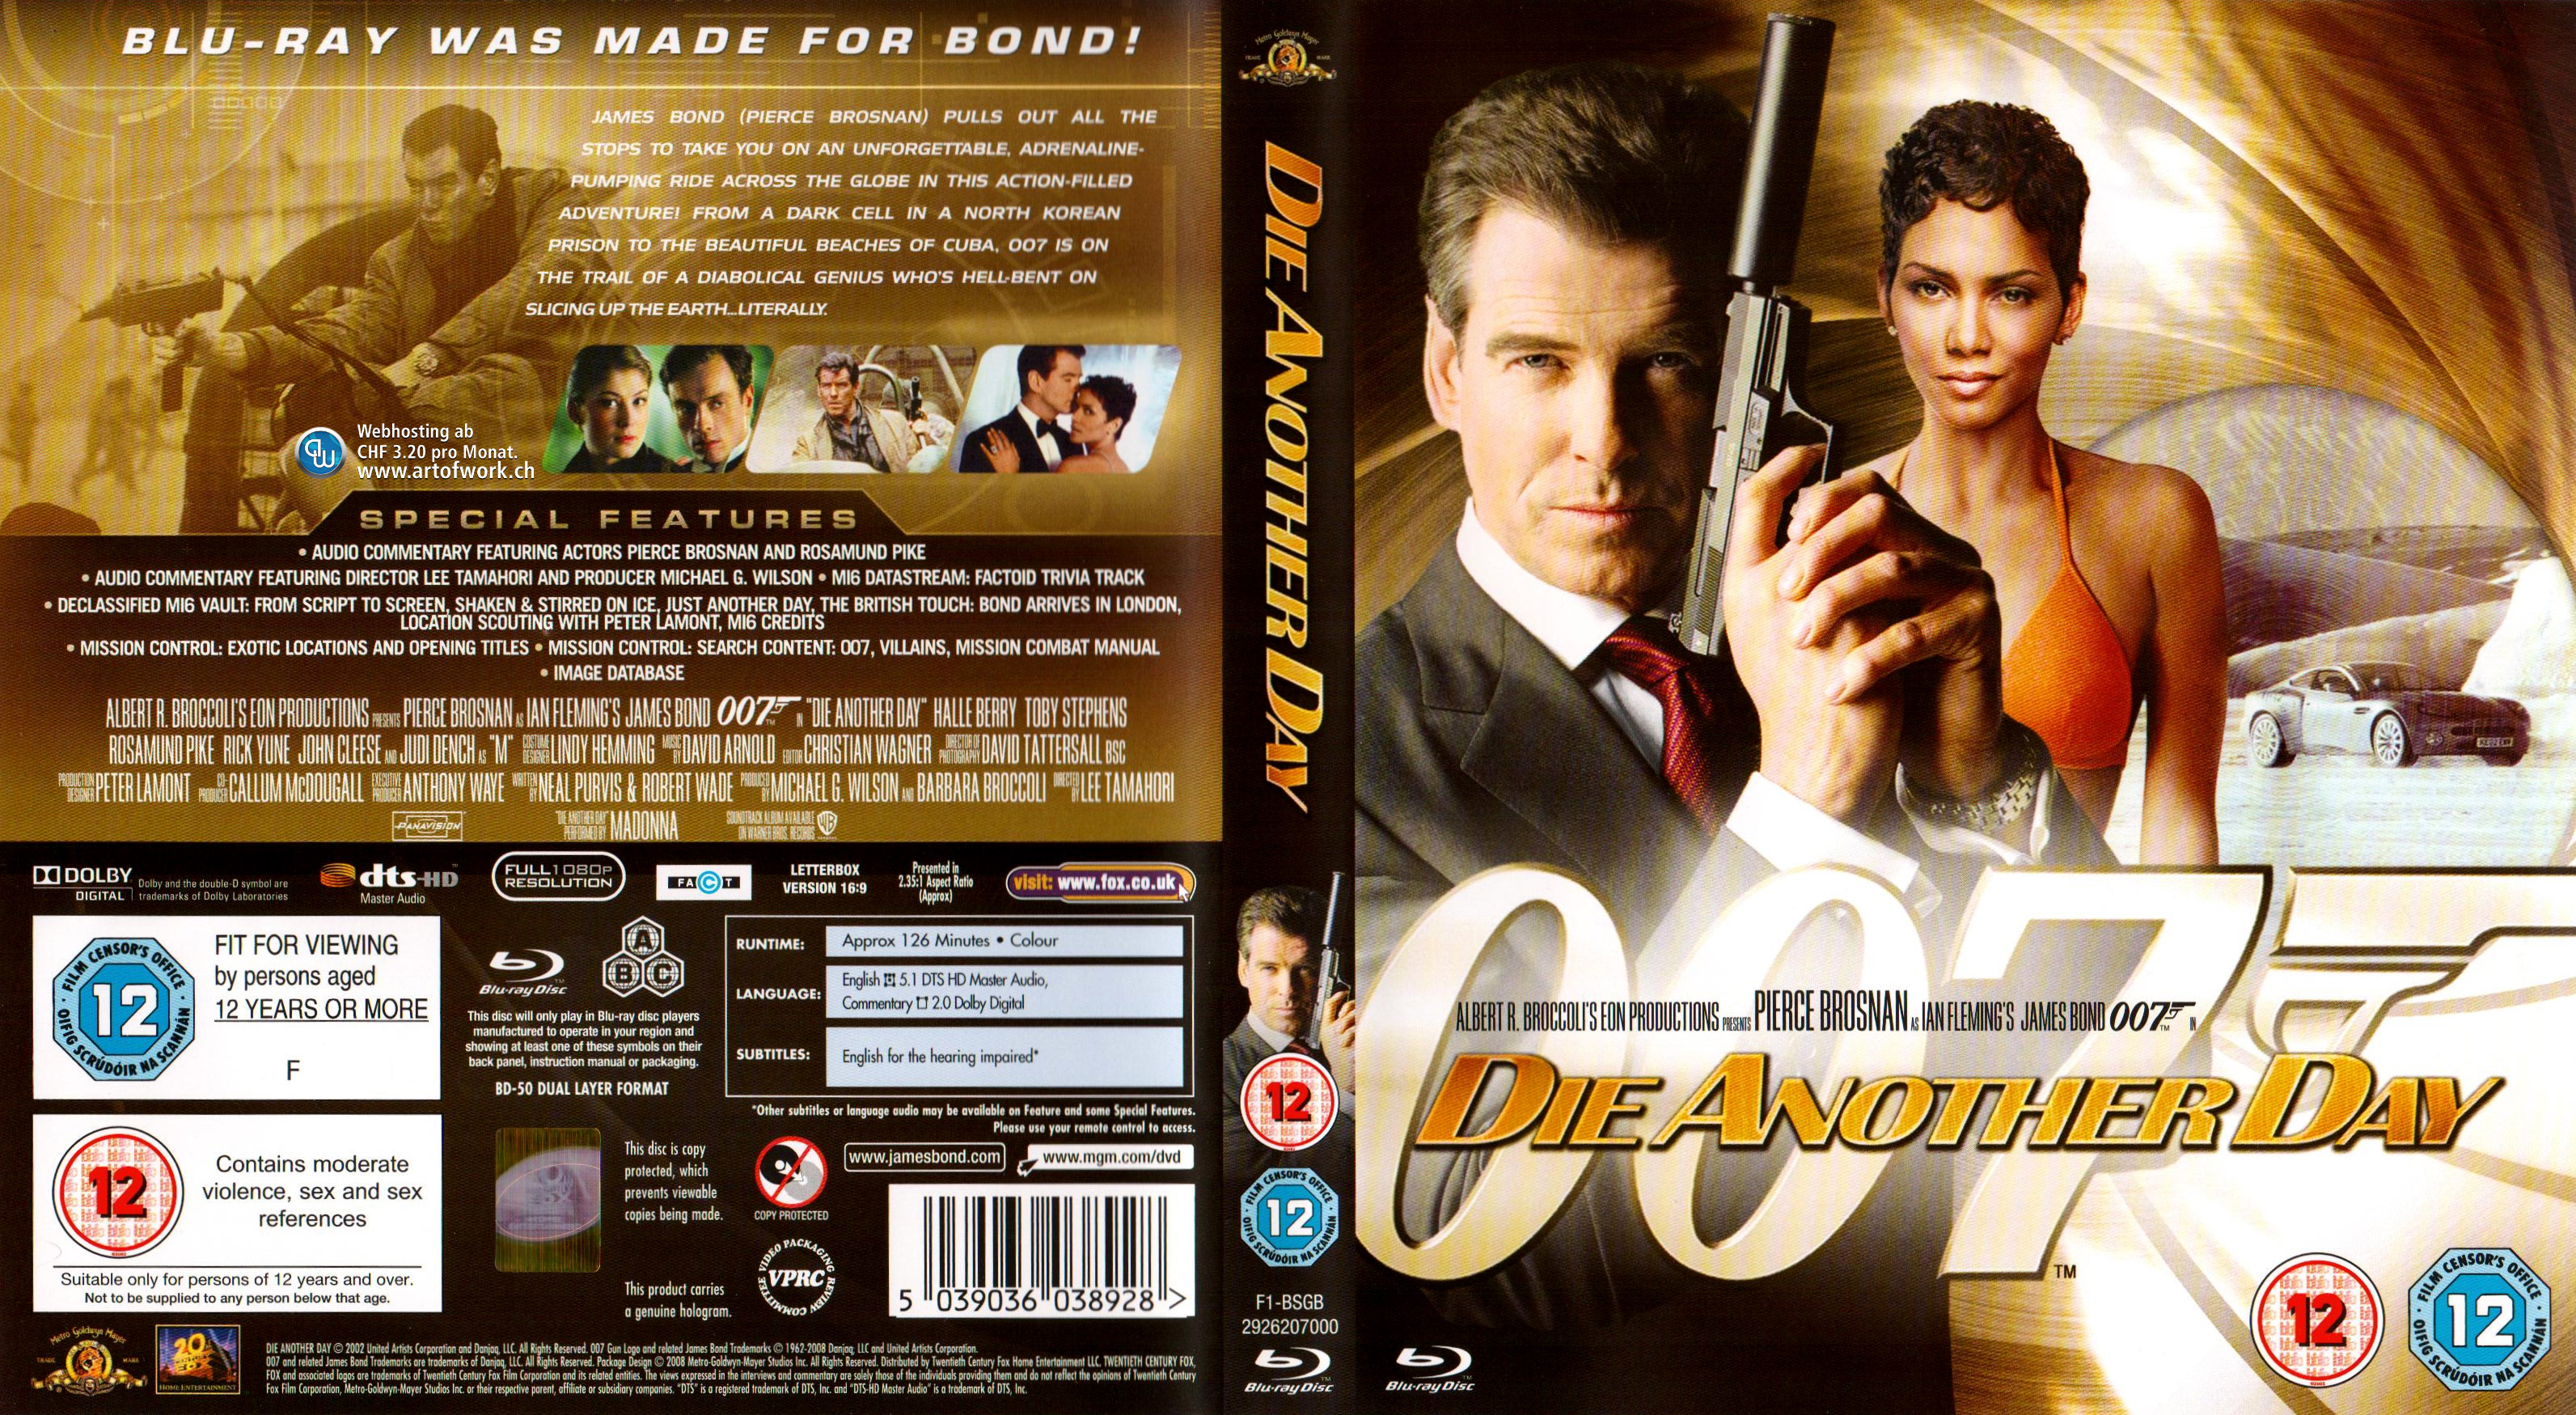 In defense of die another day